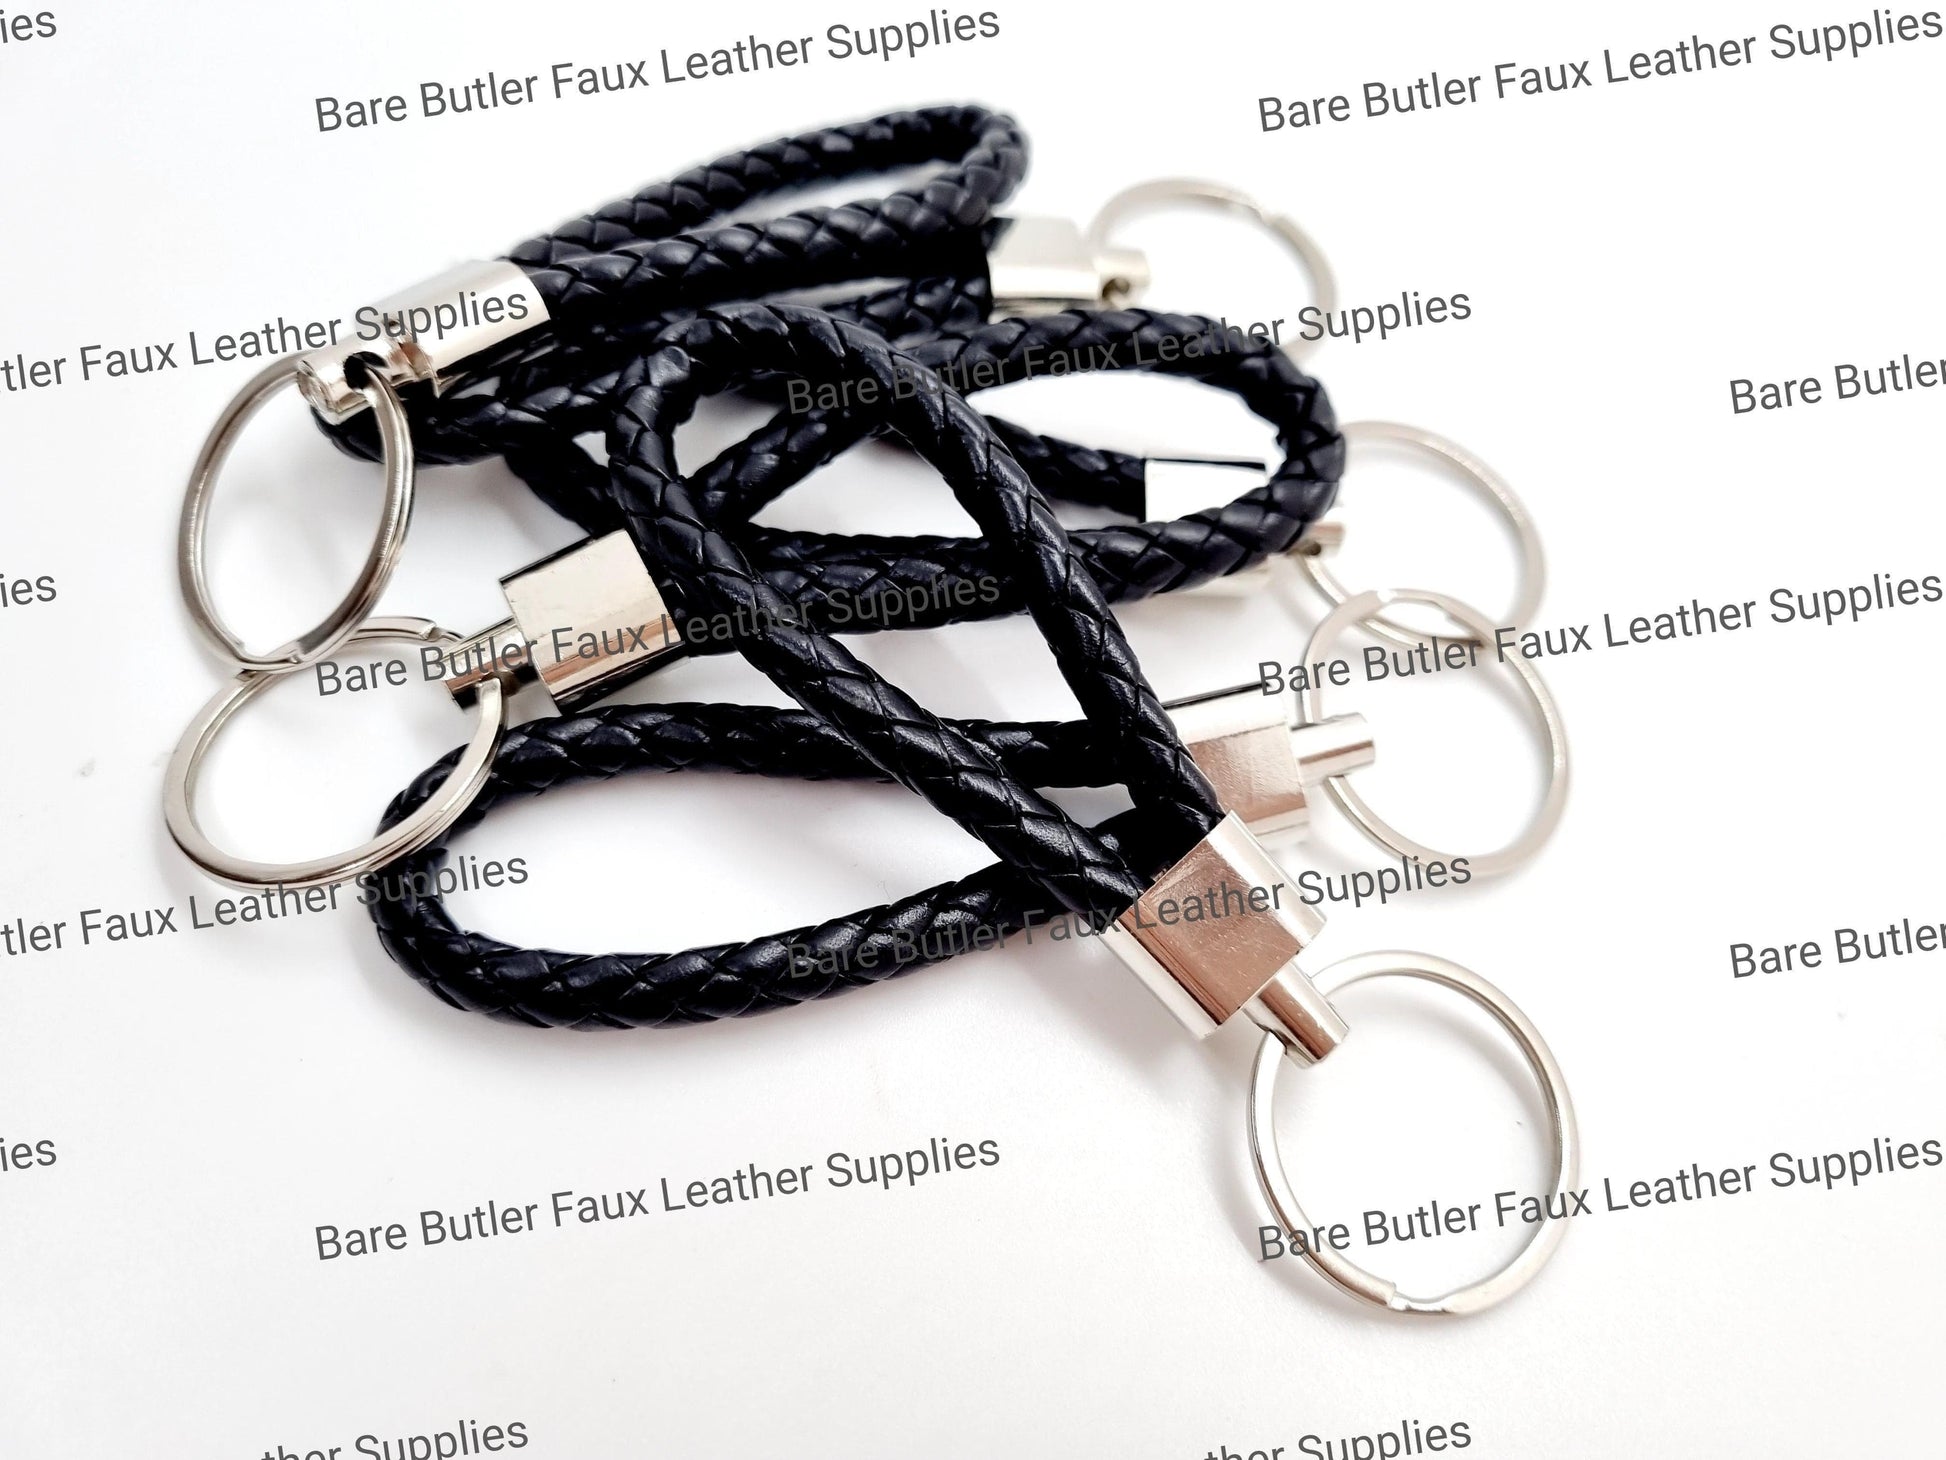 Faux Leather Wrist Strap - Black -  - Bare Butler Faux Leather Supplies 